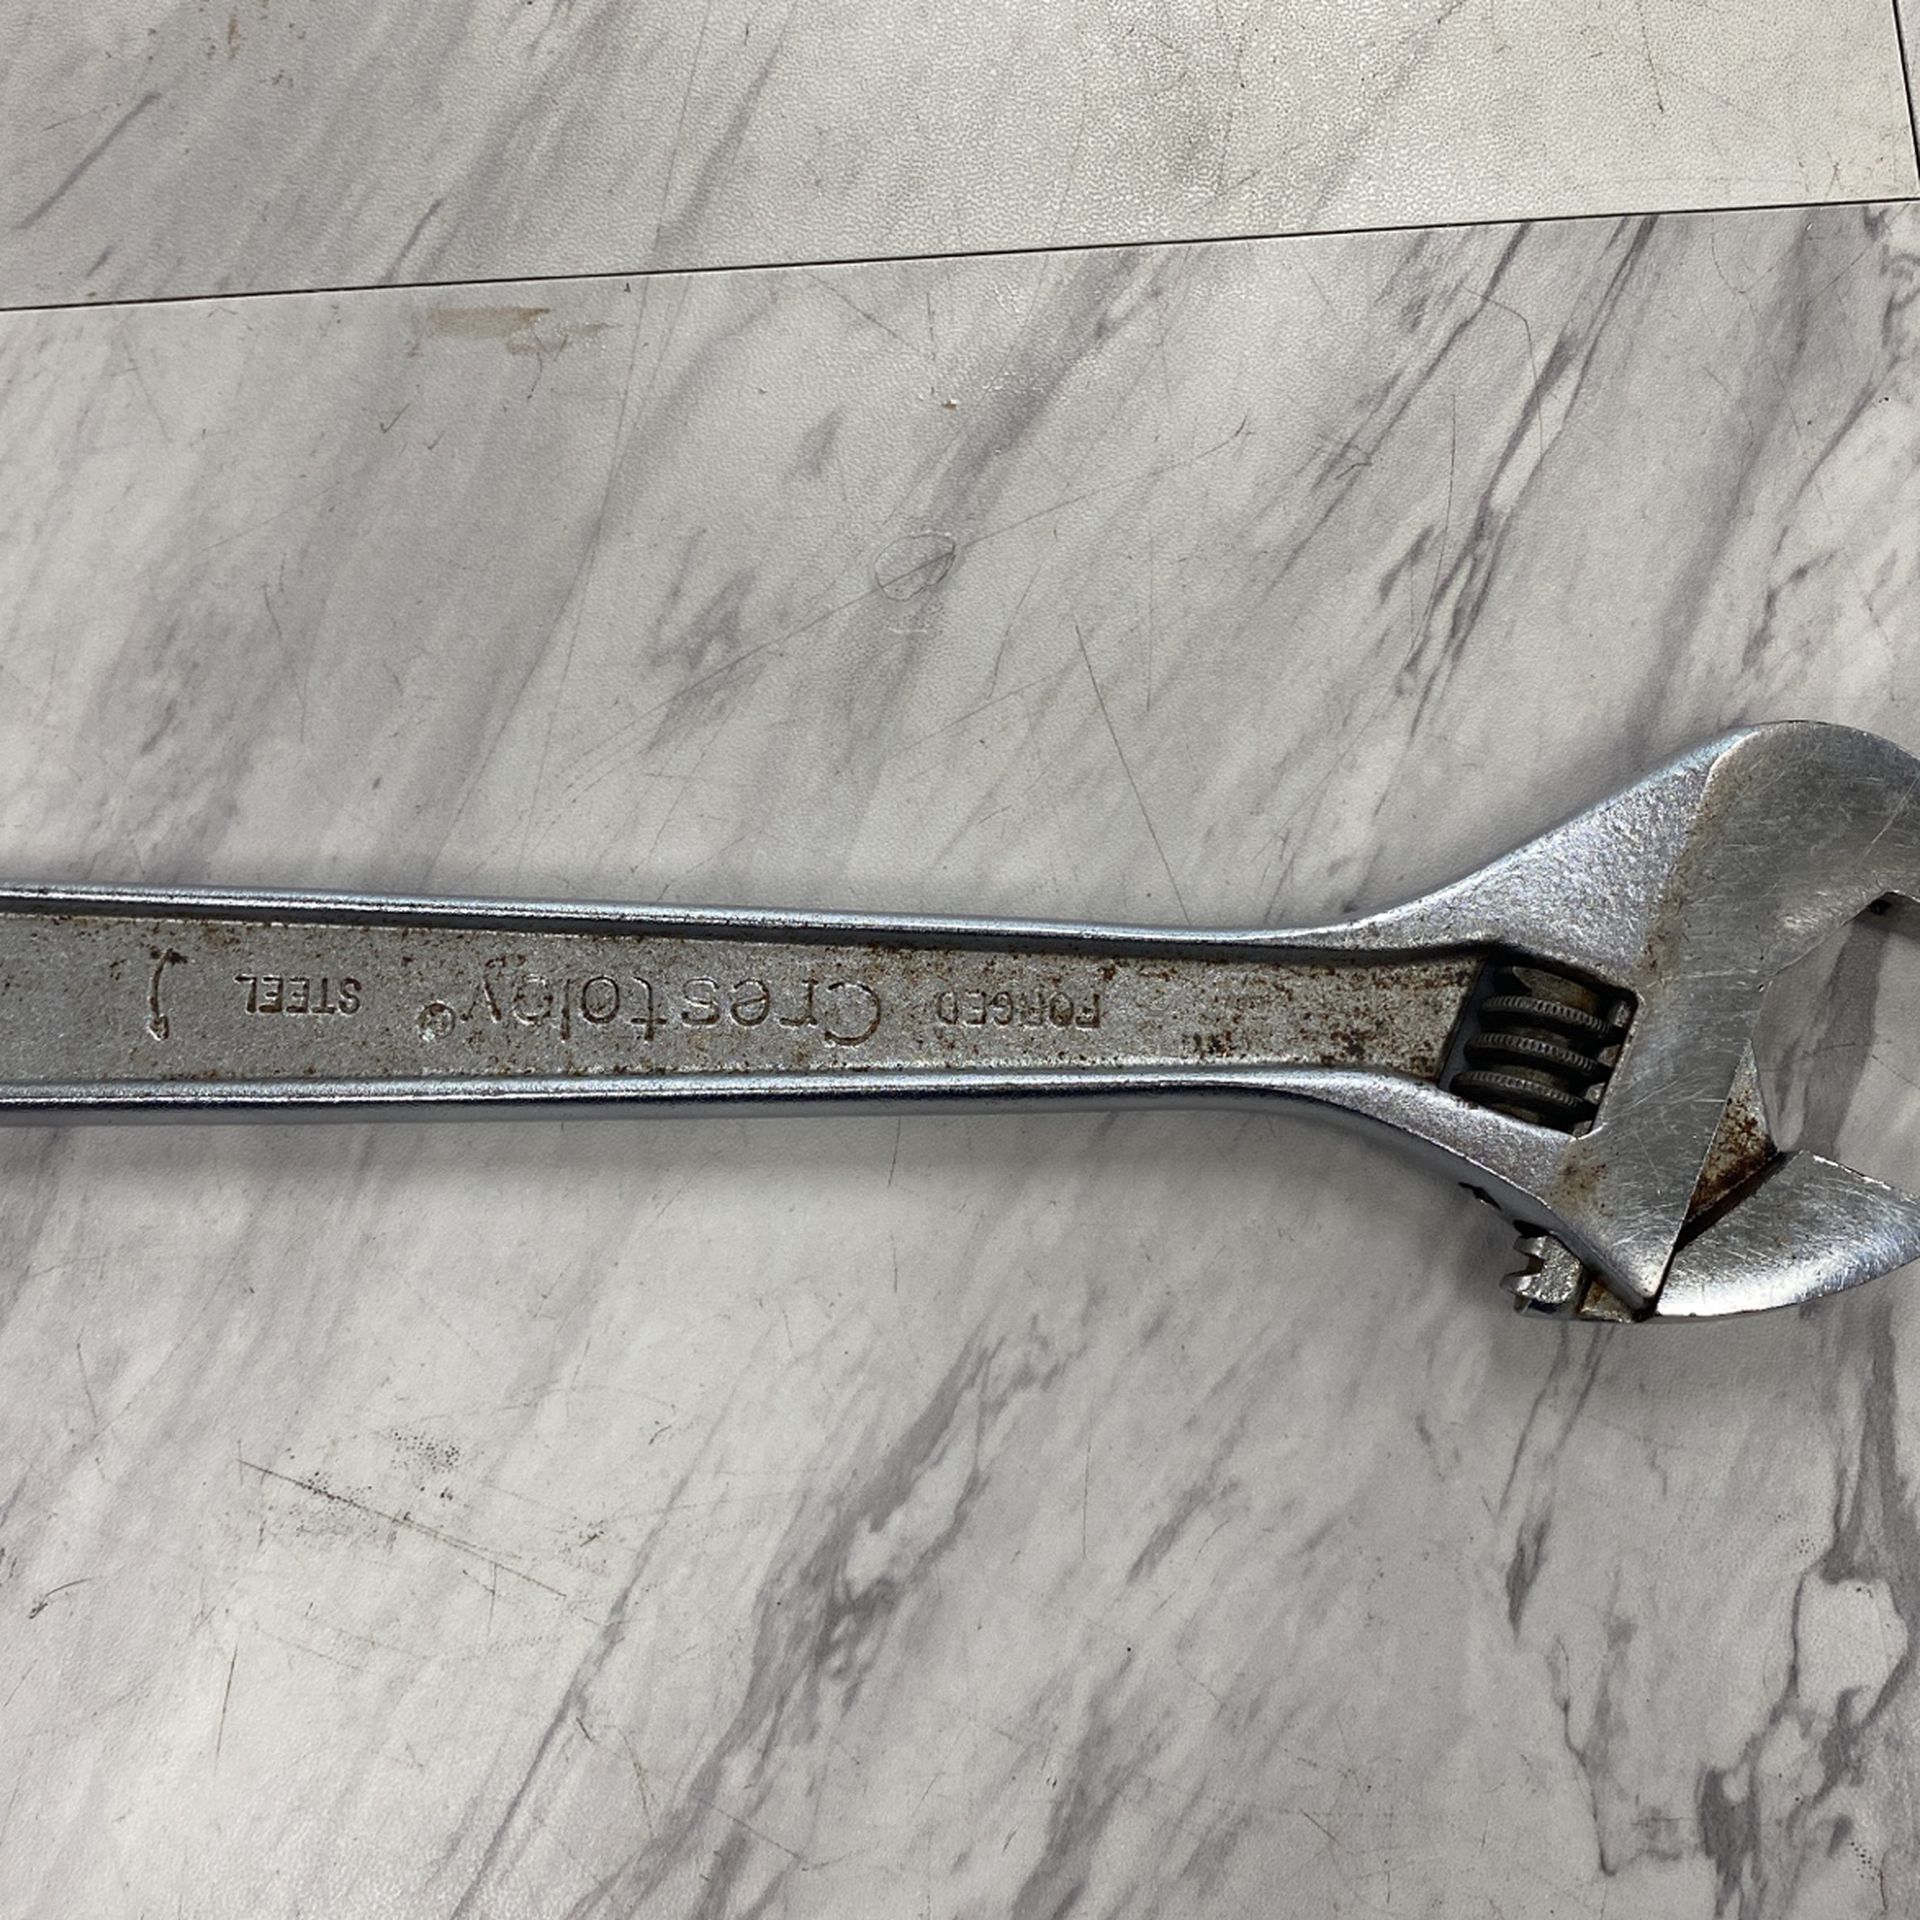 Adjustable Crescent Wrench